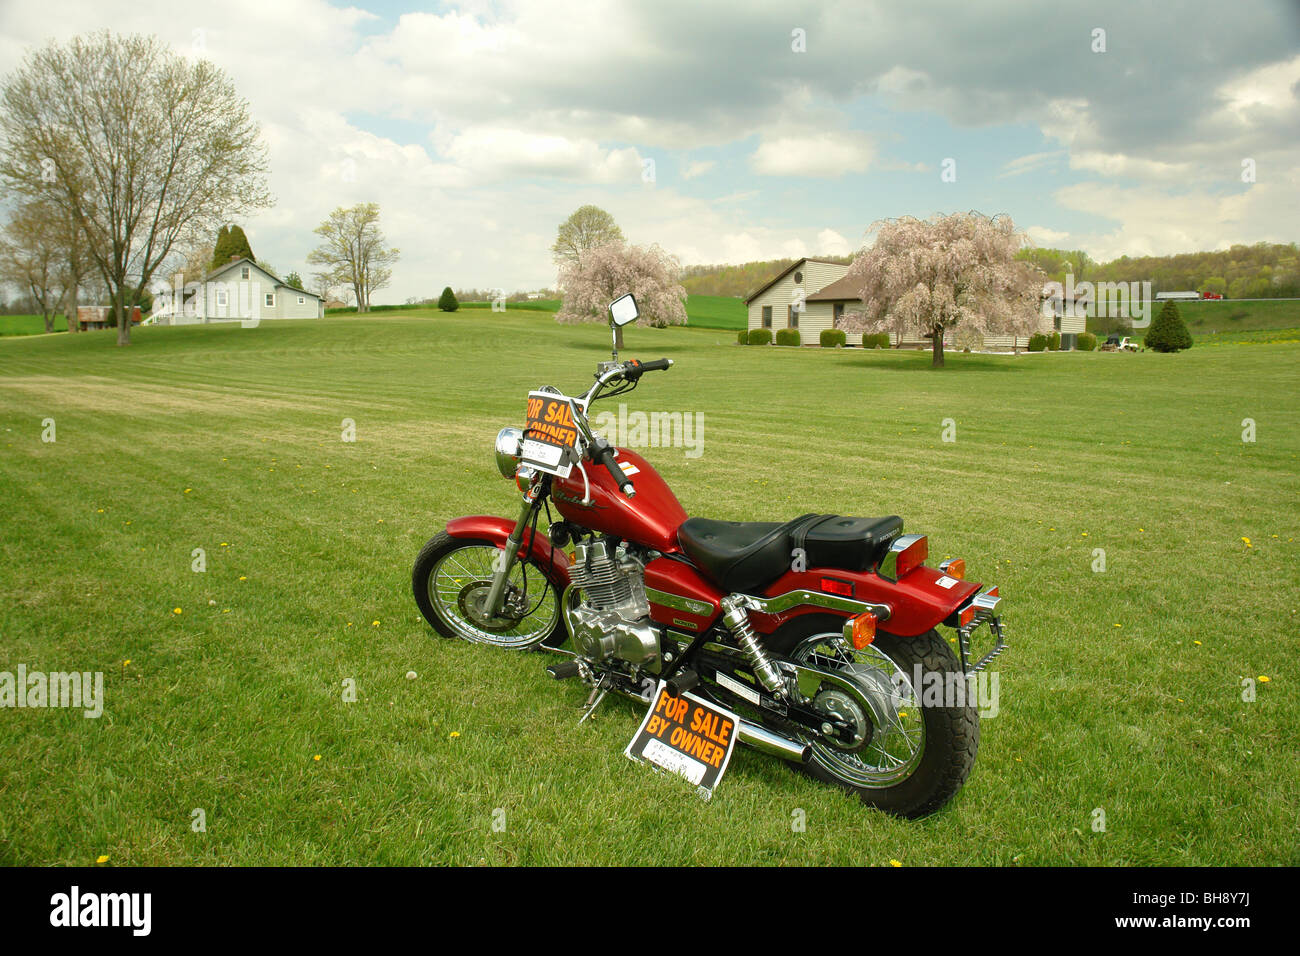 AJD64347, motorcycle for sale by owner in front yard, VA, Virginia Stock Photo